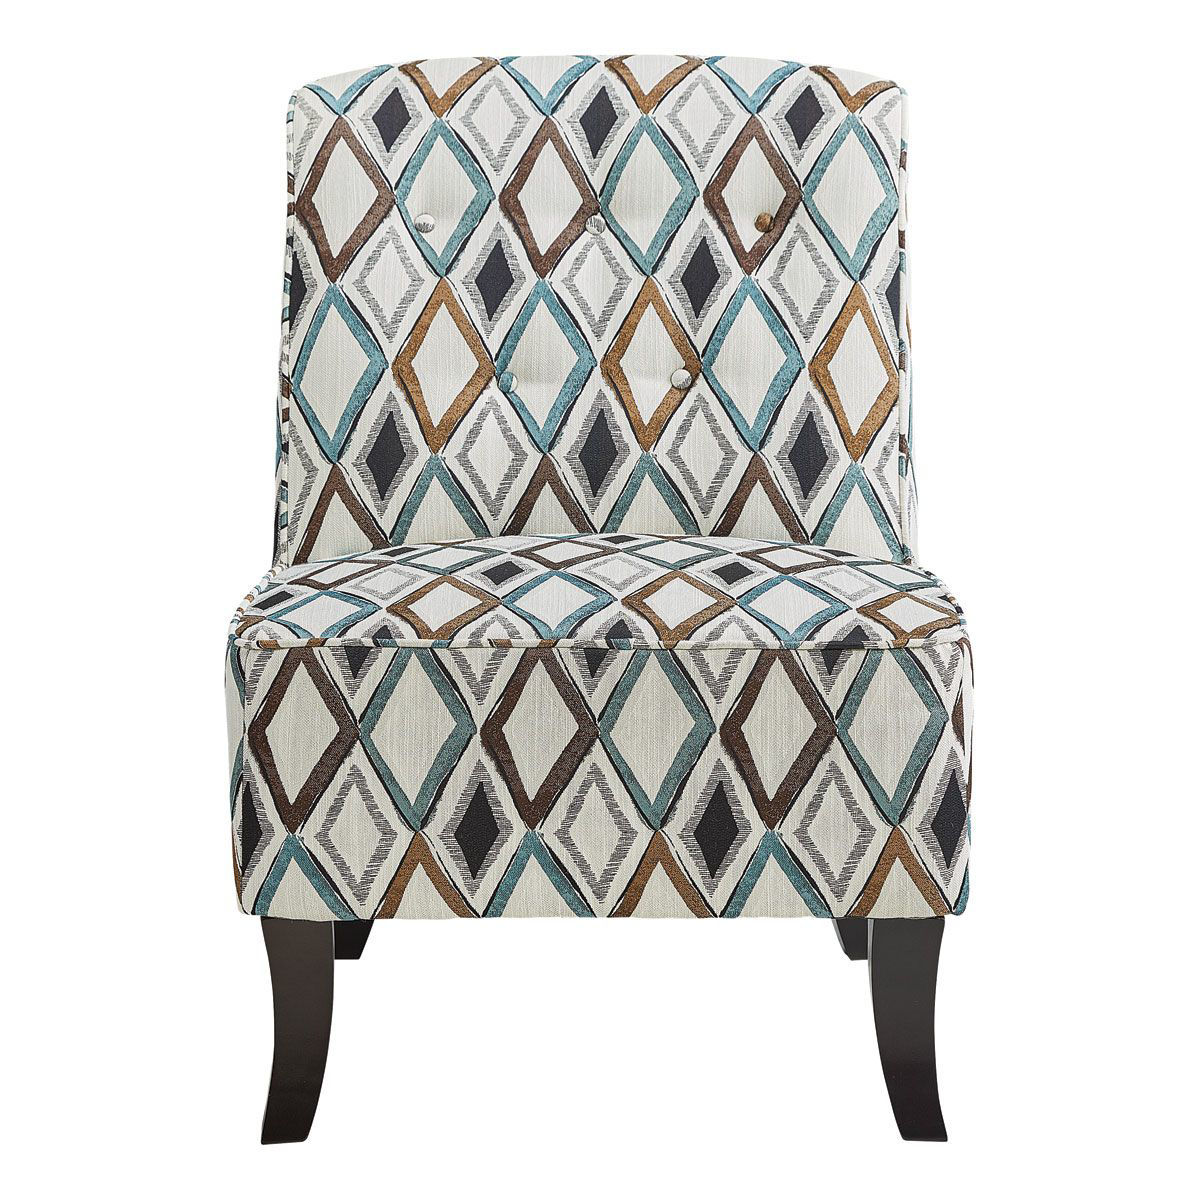 HALEY ACCENT CHAIR | Badcock Home Furniture &more